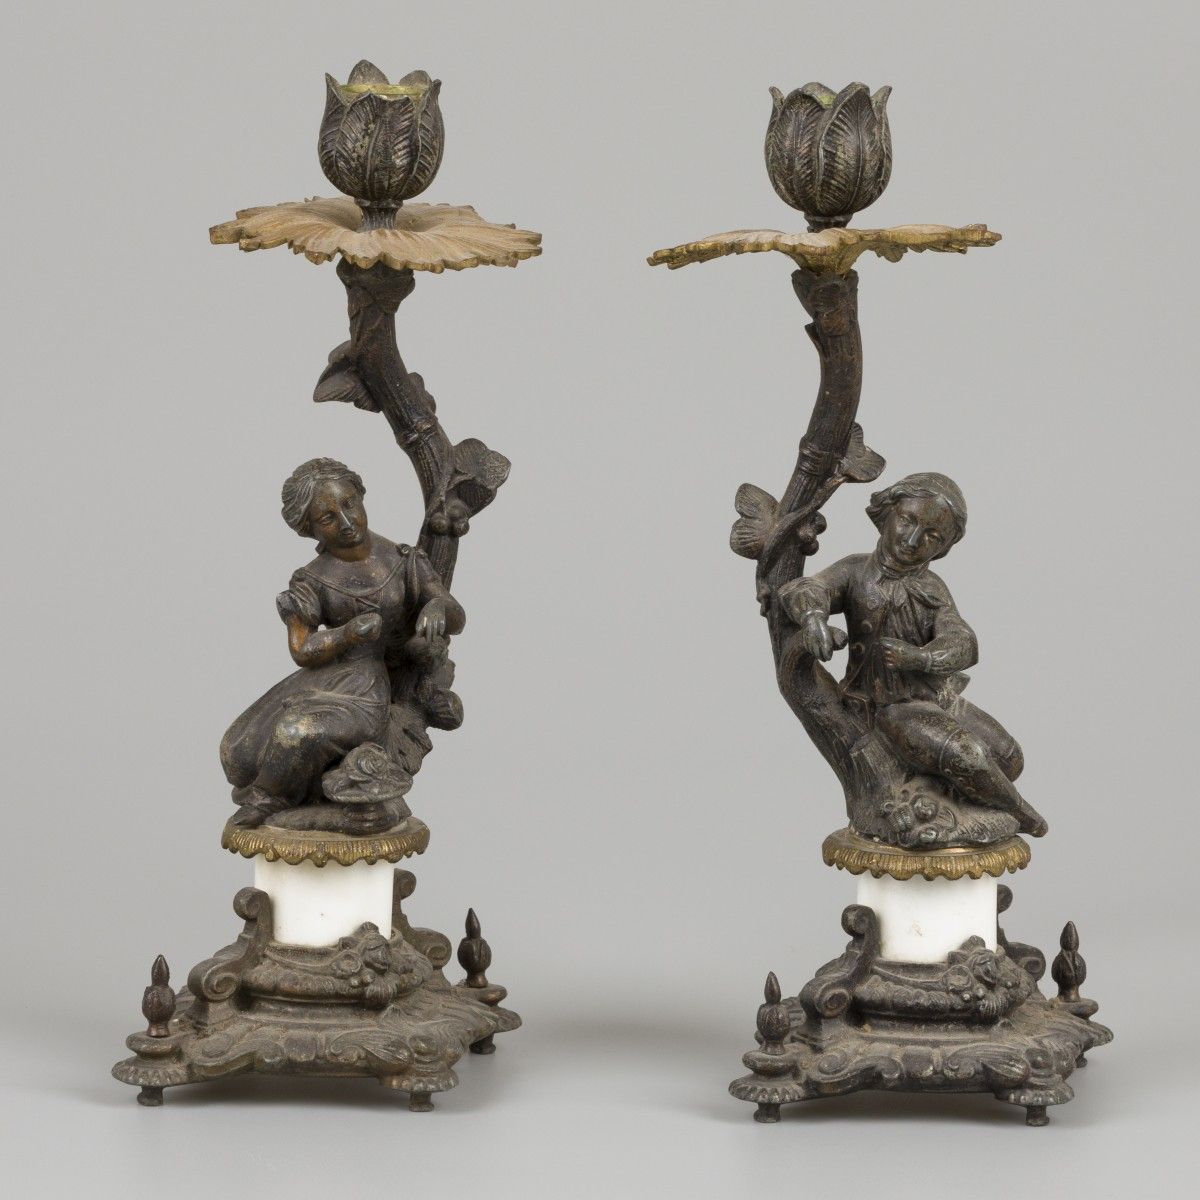 A set of (2) bronze candles, France, late 19th century. Lo stelo a forma di pian&hellip;